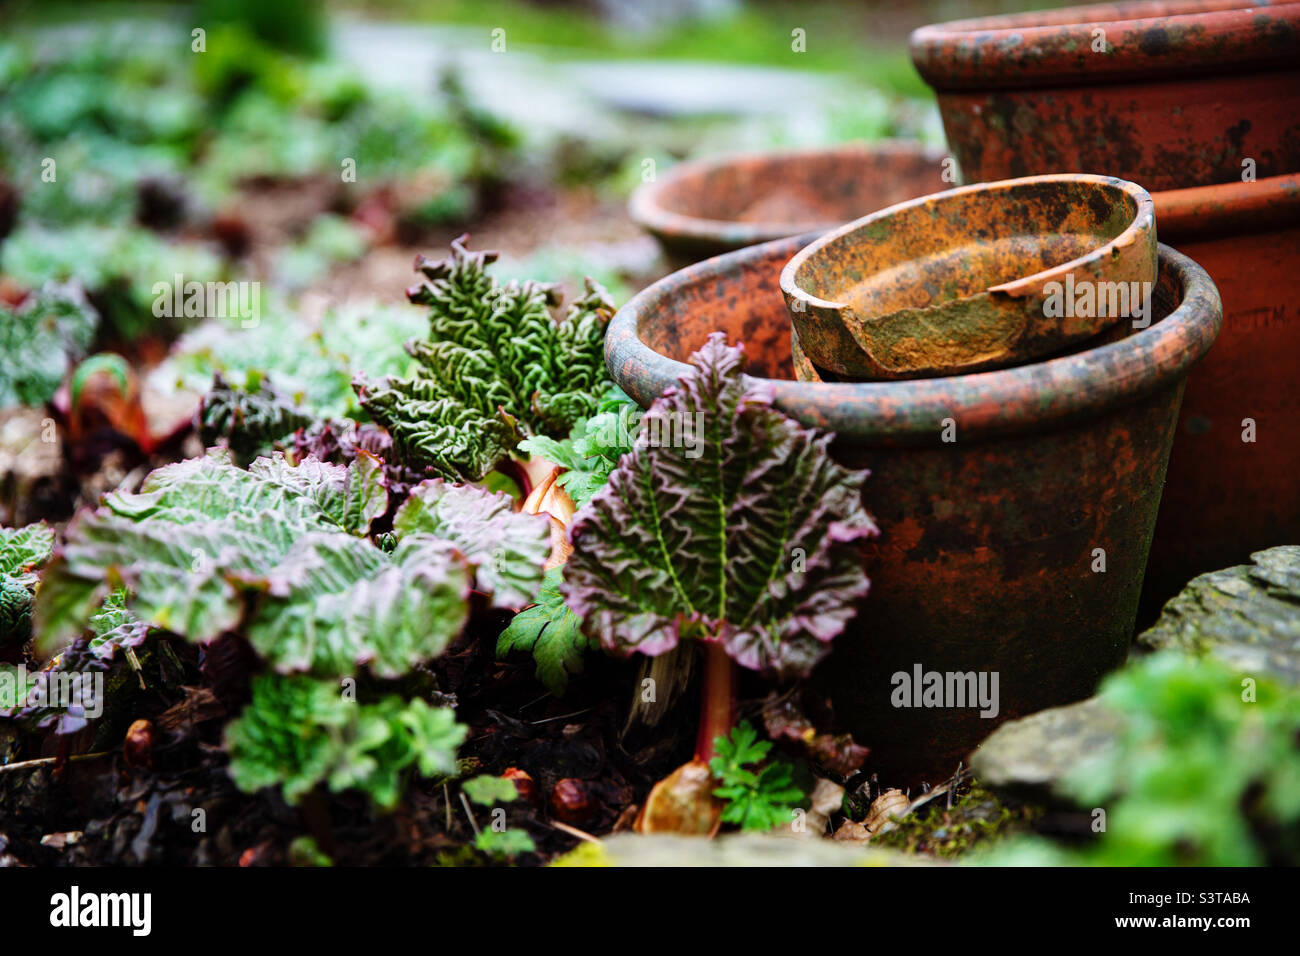 An allotment with a rhubarb patch giving young forced shoots or stems of fruit alongside well worn and weathered terracotta clay plant pots and copy space Stock Photo